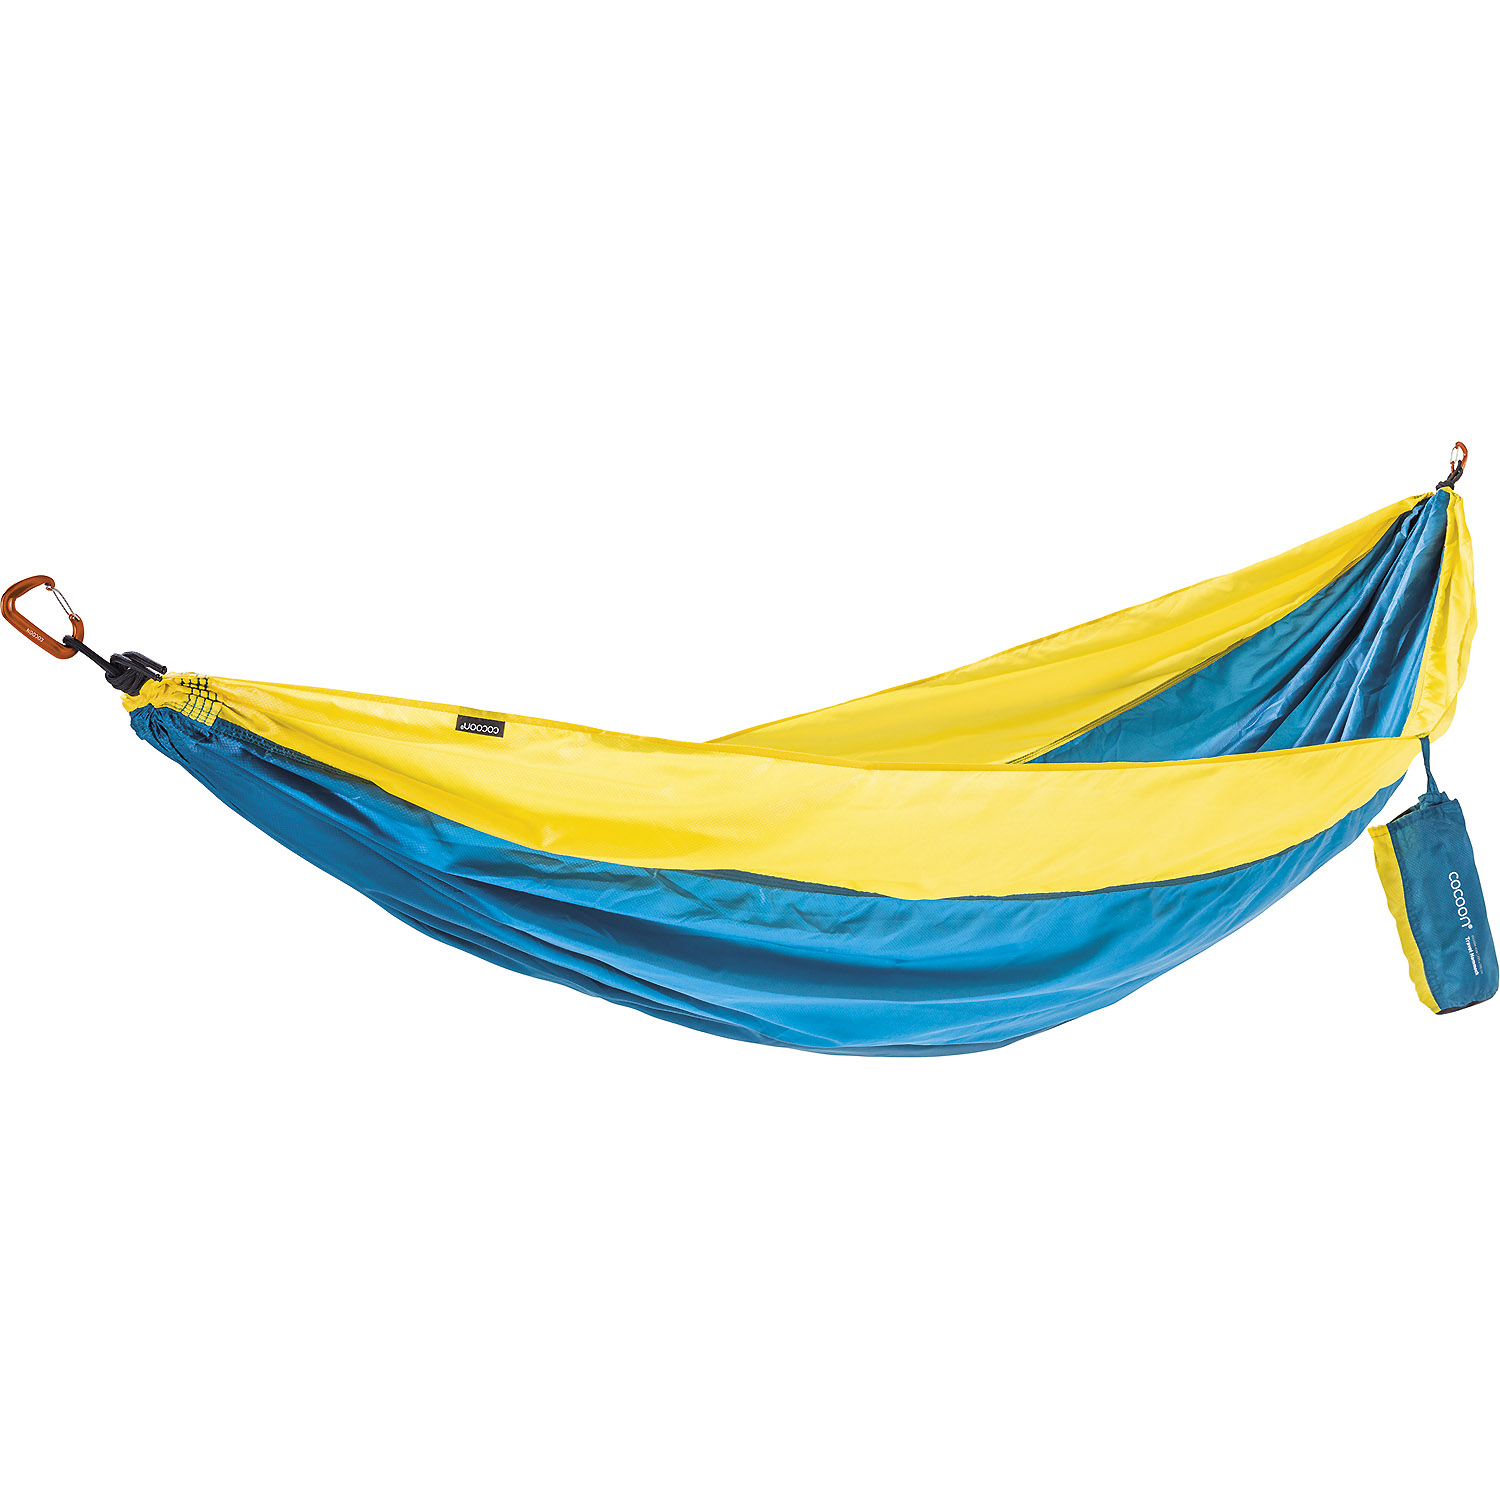 COCOON Travel Hammock, double size